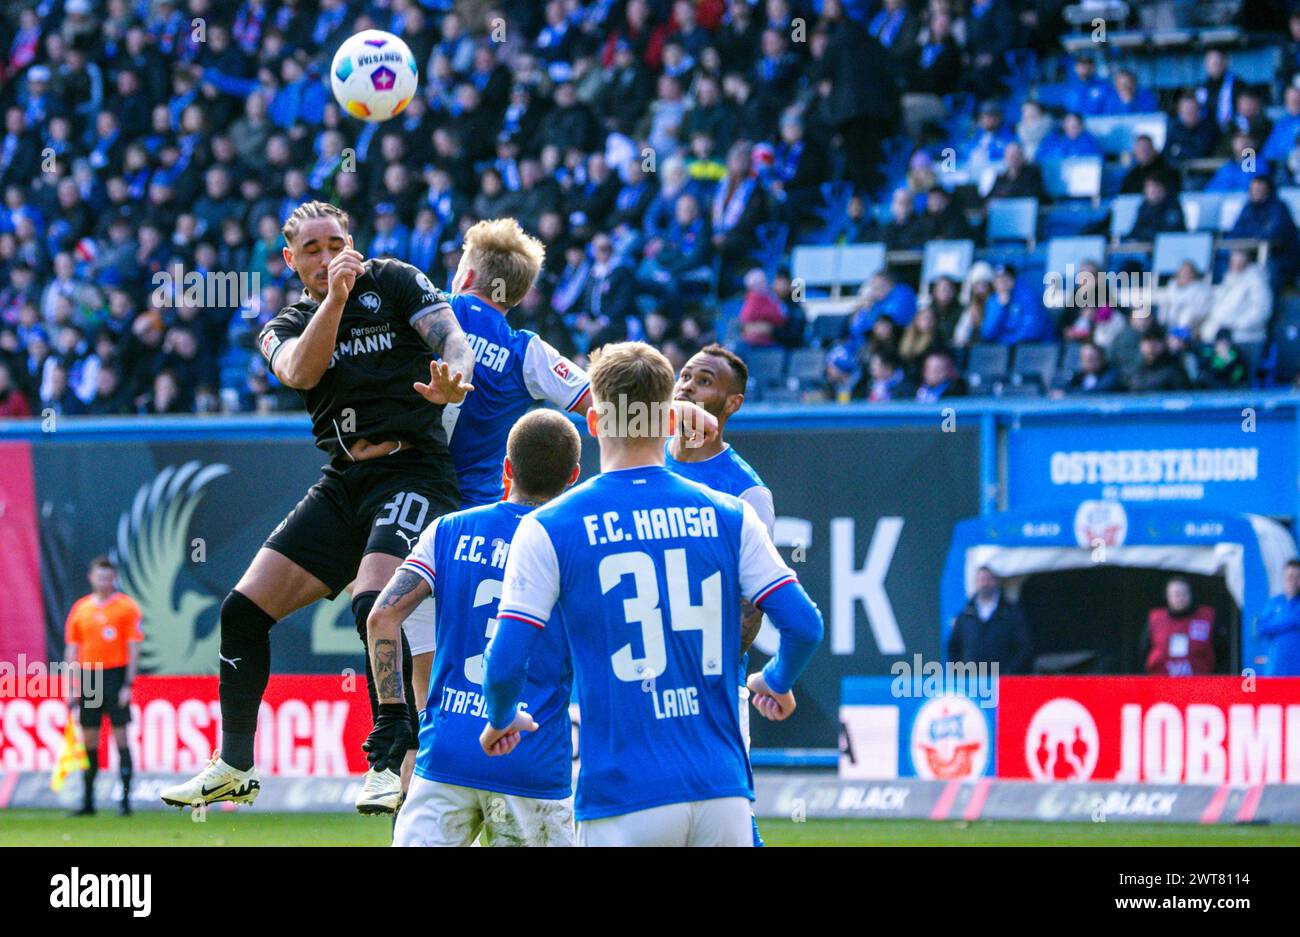 Rostock, Germany. 16th Mar, 2024. Soccer: Bundesliga 2, Hansa Rostock - SpVgg Greuther Fürth, Matchday 26, Ostseestadion. Armindo Sieb (l) of Greuther Fürth with a header against Rostock's Simon Rhein (r). Credit: Jens Büttner/dpa - IMPORTANT NOTE: In accordance with the regulations of the DFL German Football League and the DFB German Football Association, it is prohibited to utilize or have utilized photographs taken in the stadium and/or of the match in the form of sequential images and/or video-like photo series./dpa/Alamy Live News Stock Photo